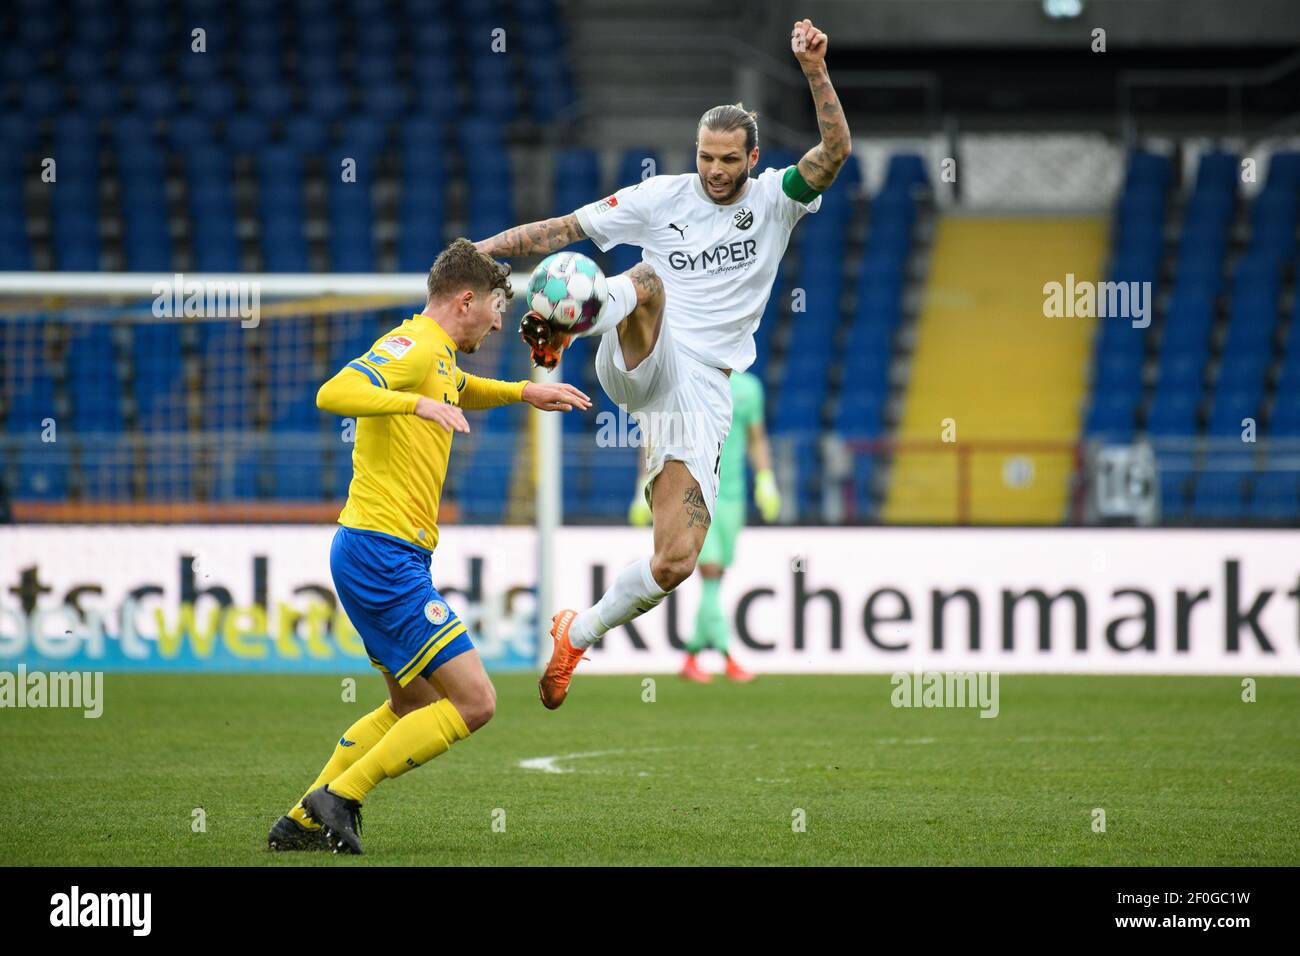 Brunswick, Germany. 07th Mar, 2021. Football: 2. Bundesliga, Eintracht Braunschweig - SV Sandhausen, Matchday 24 at Eintracht-Stadion. Sandhausen's defender Dennis Diekmeier (r) plays against Braunschweig's defender Nico Klaß. Credit: Swen Pförtner/dpa - IMPORTANT NOTE: In accordance with the regulations of the DFL Deutsche Fußball Liga and/or the DFB Deutscher Fußball-Bund, it is prohibited to use or have used photographs taken in the stadium and/or of the match in the form of sequence pictures and/or video-like photo series./dpa/Alamy Live News Stock Photo